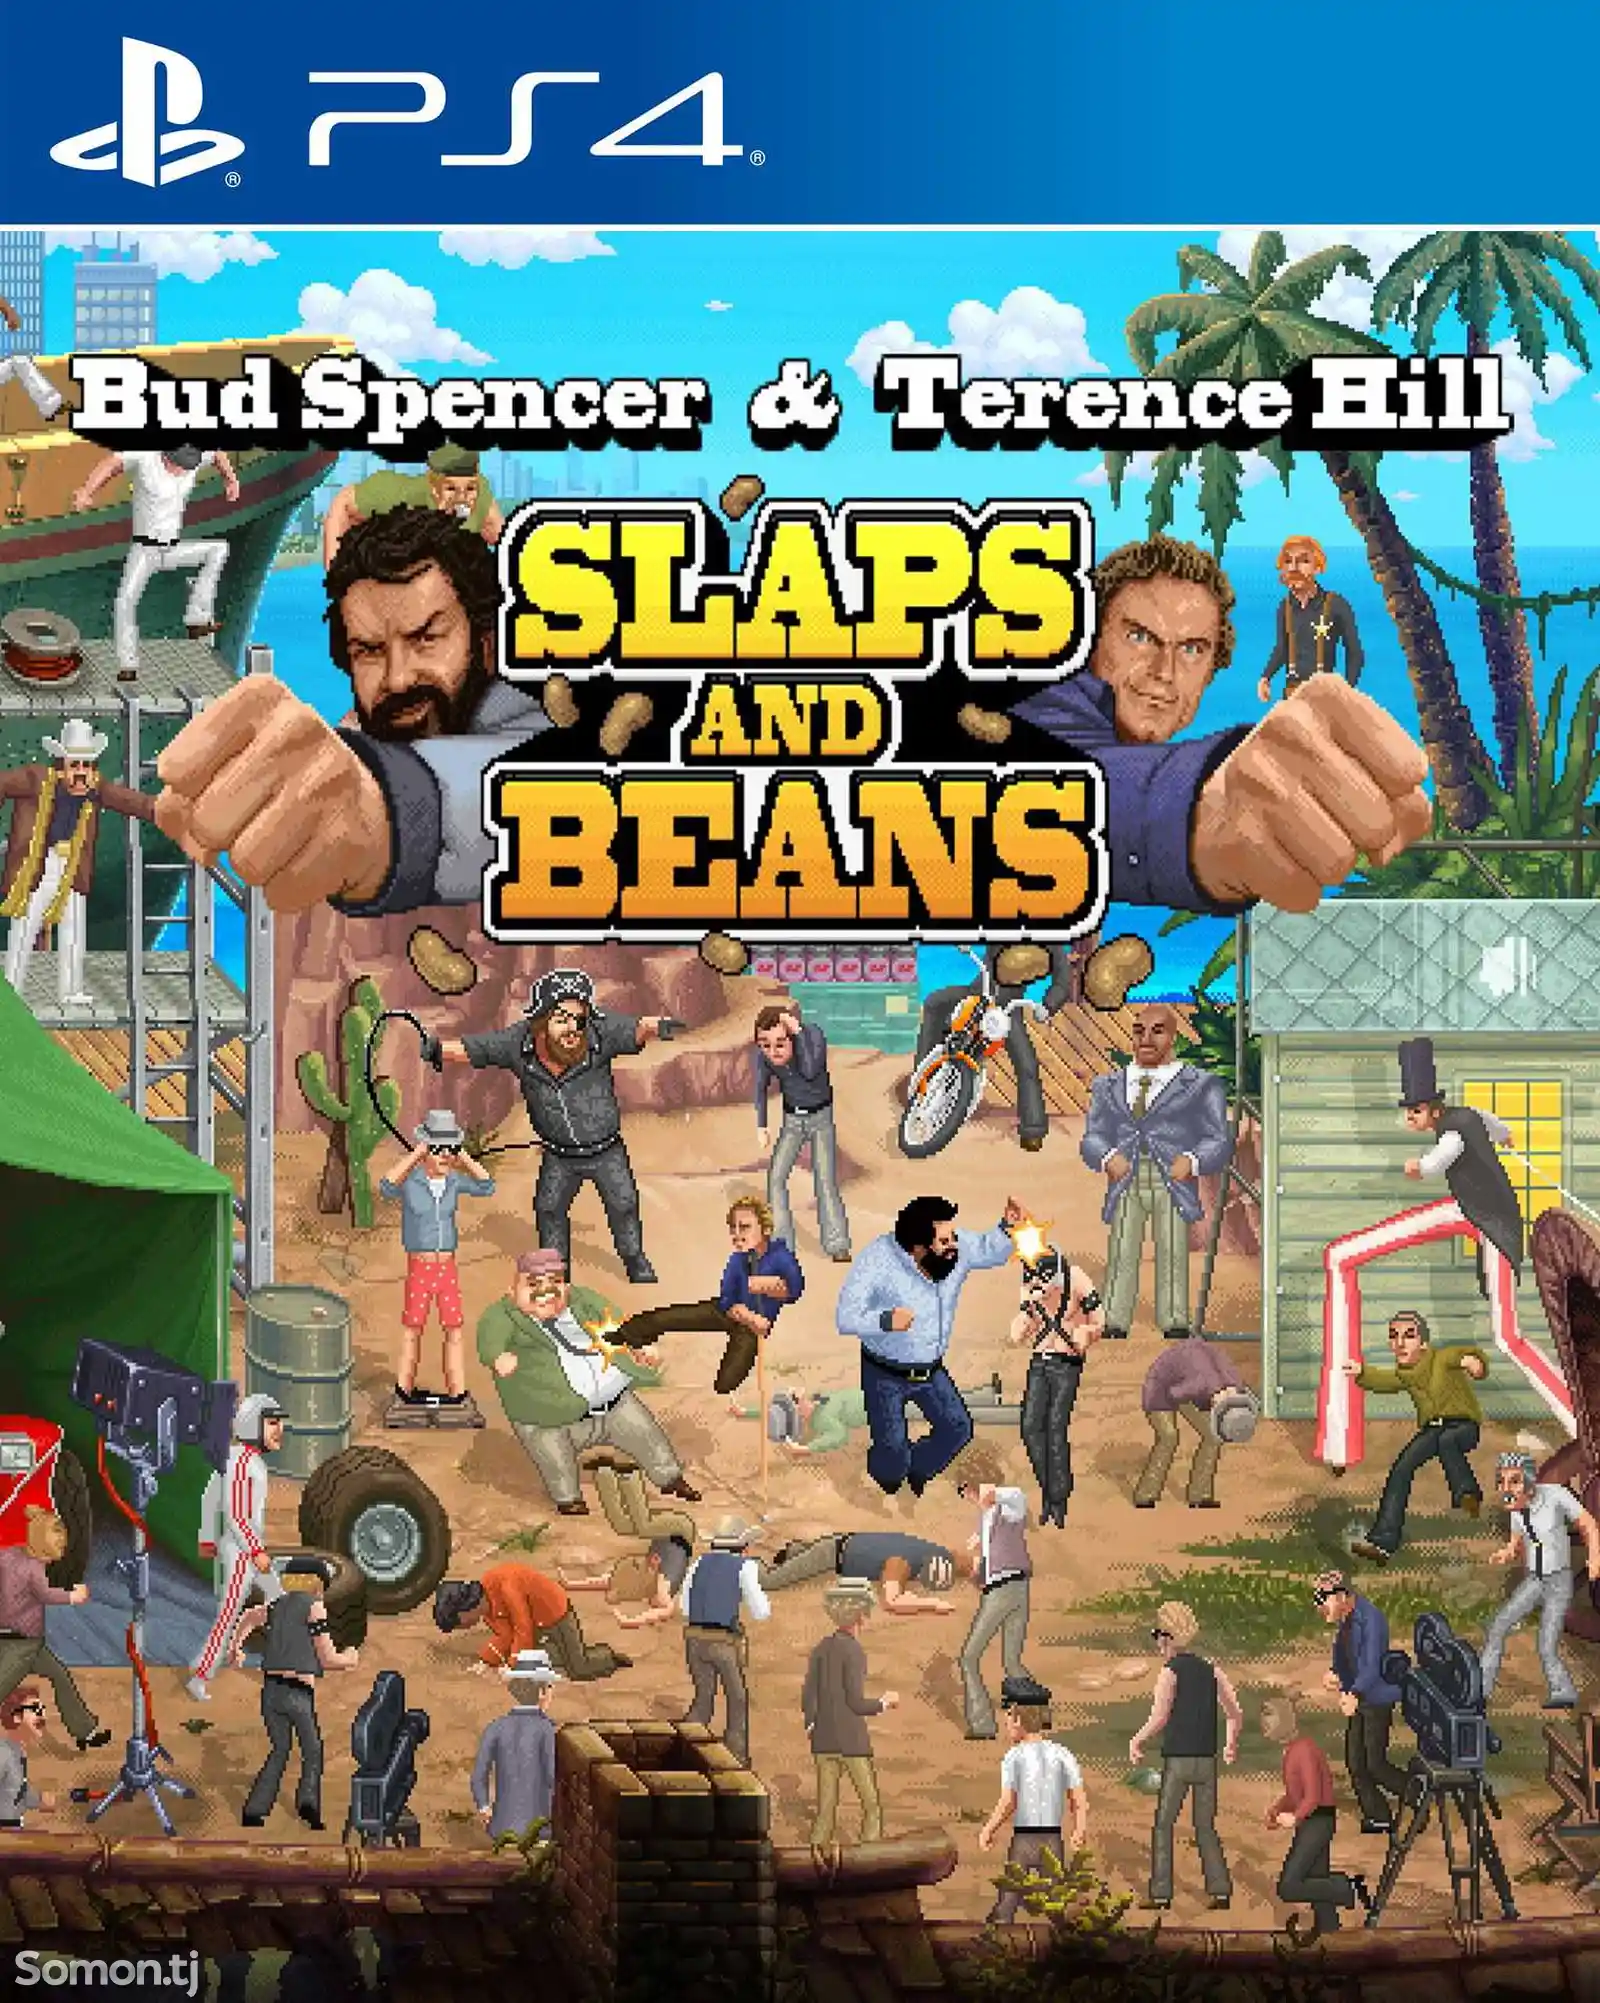 Игра Bud Spencer and Terence Hill Slaps and Beans для PS-4 / 6.72 / 9.00 /-1